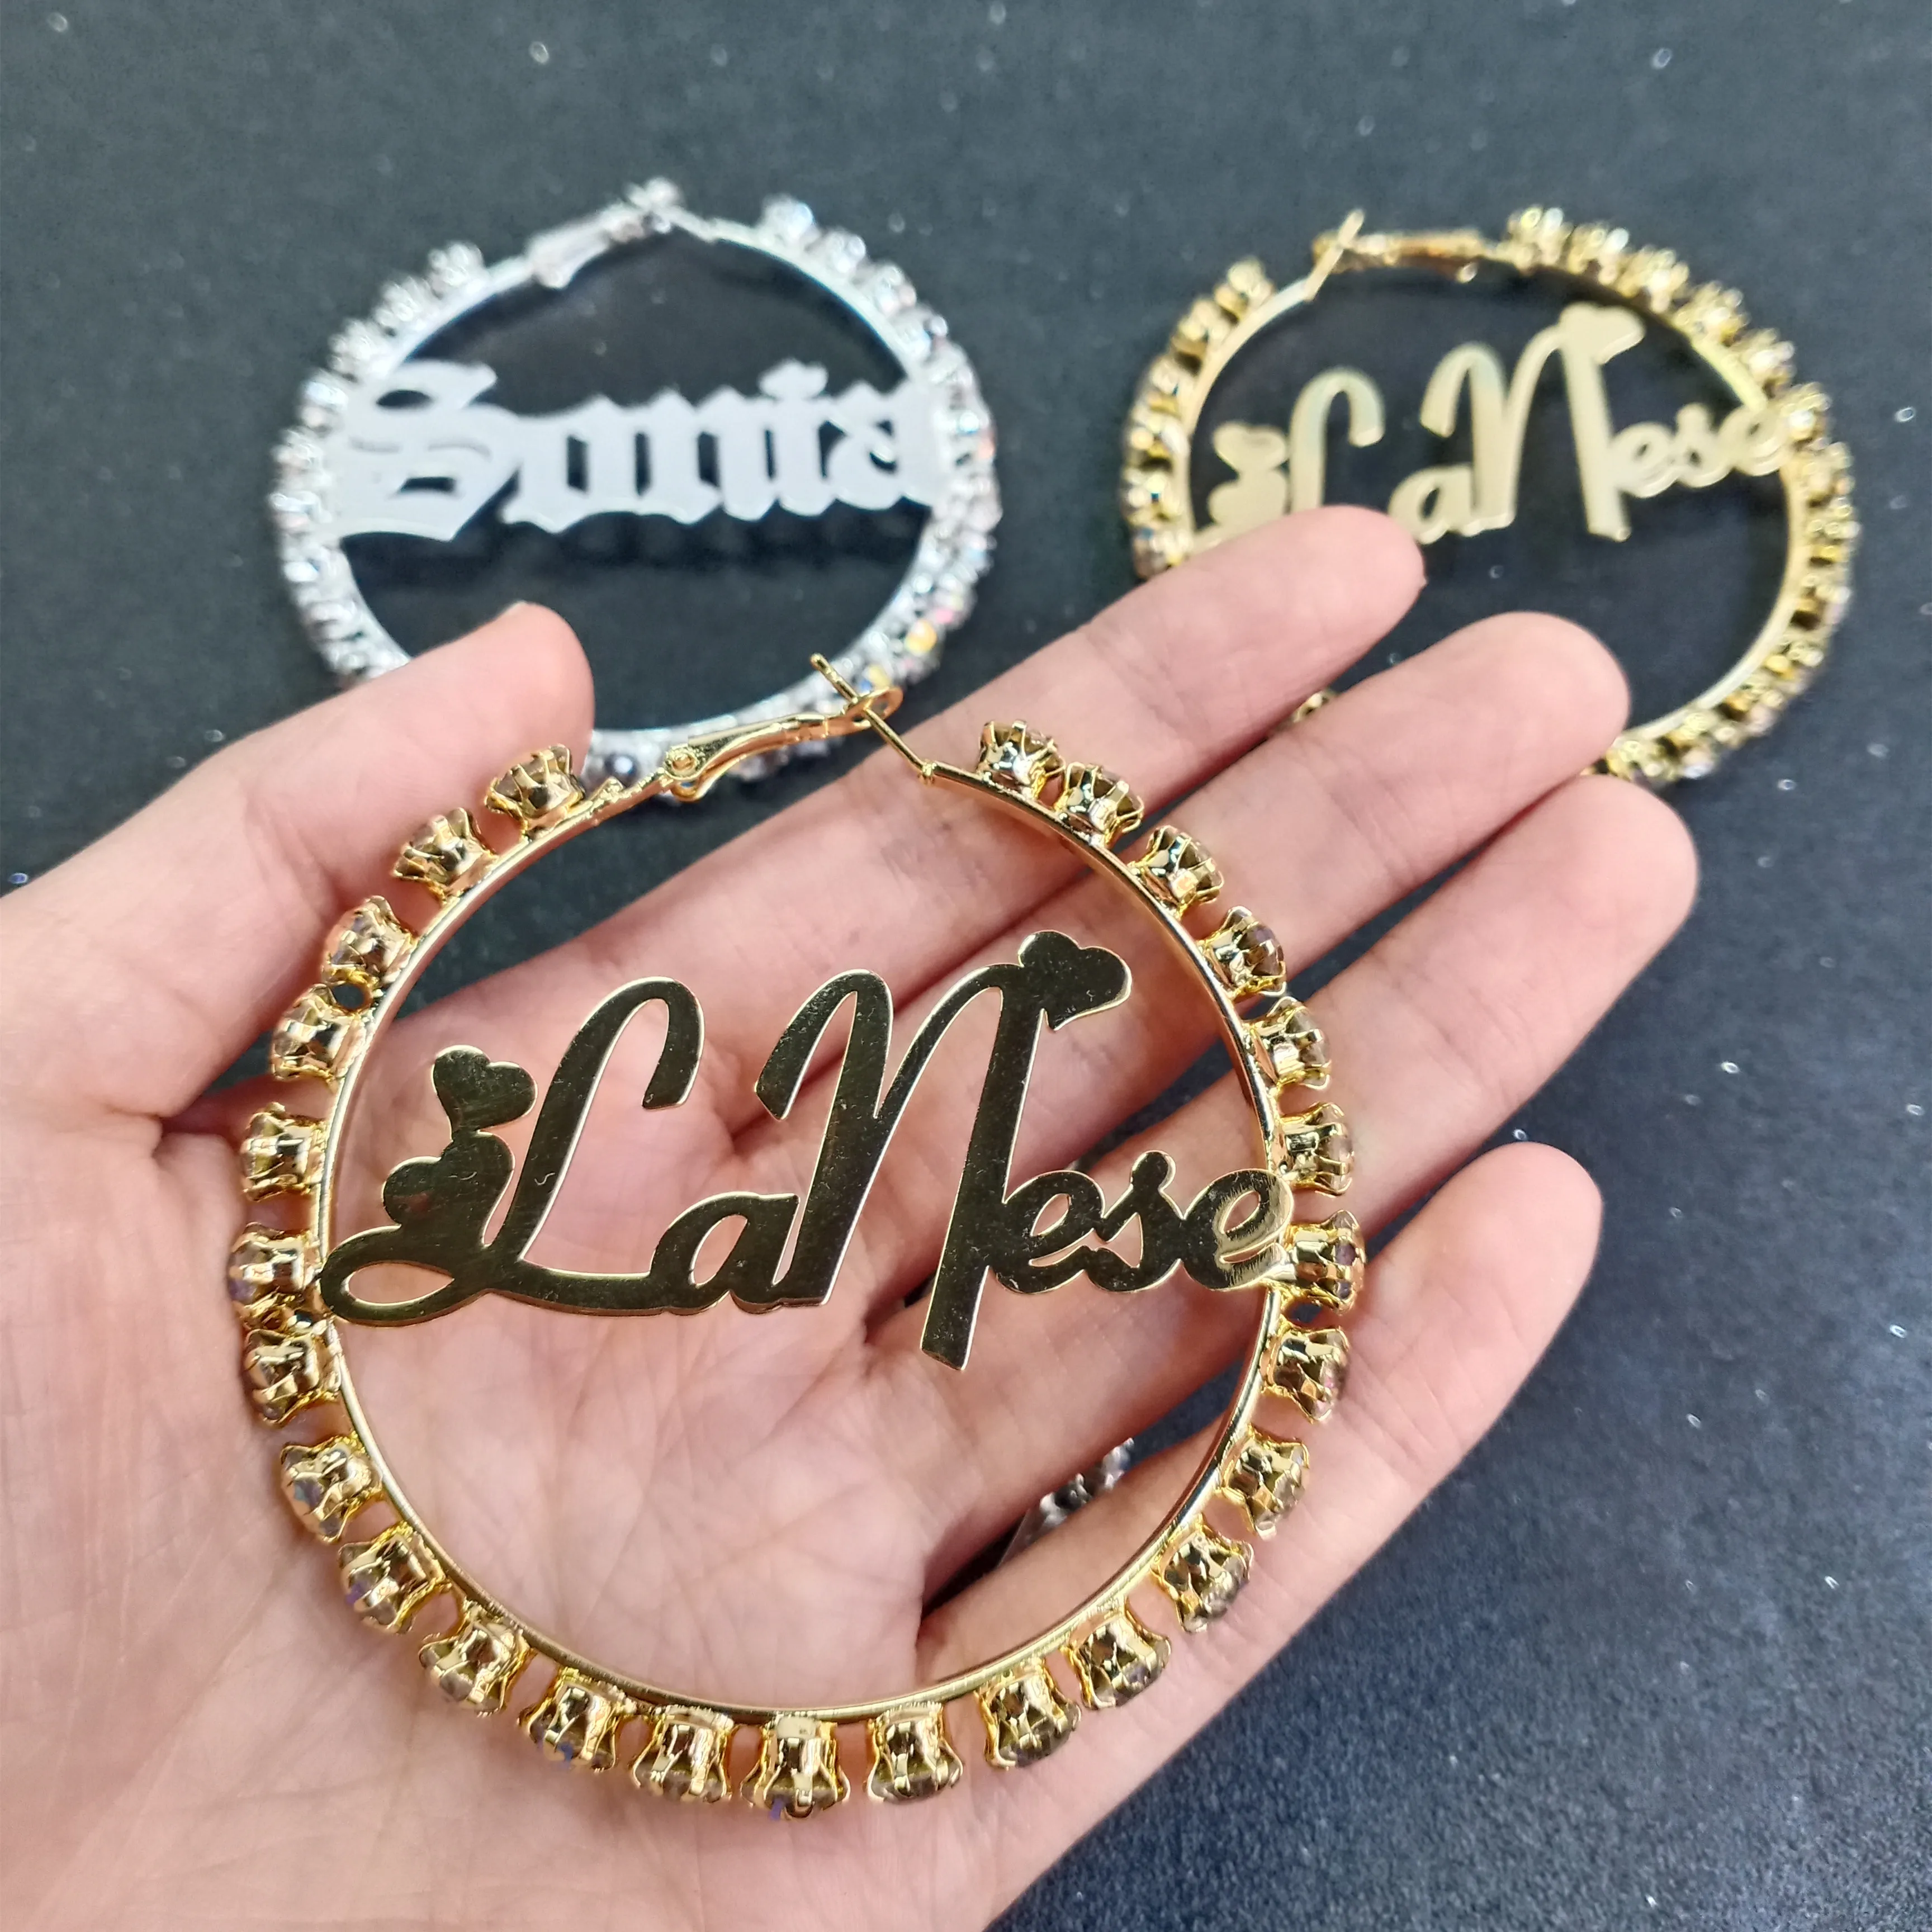 Lateefah Customed Jewelry  Zircon Big Earrings for Women Girls Sexy Hoop Earrings Personal Custom Name Earrings 2021 Trend custom american cemitem cosplay single joking cemitem customembroidered and b gift goods support personal name